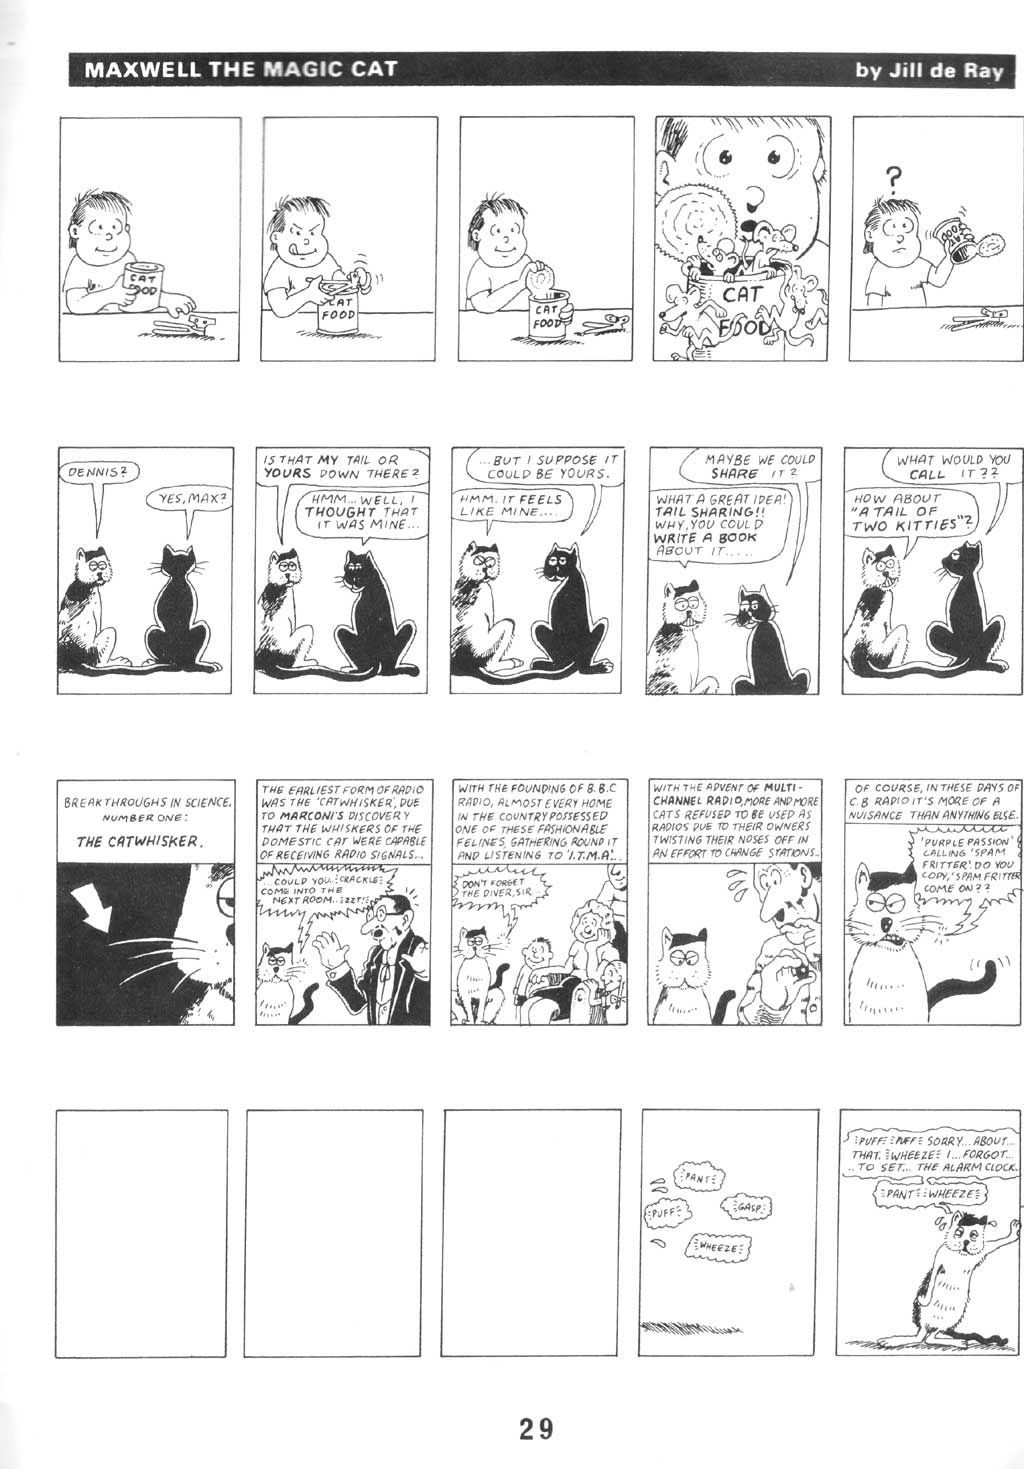 Read online Alan Moore's Maxwell the Magic Cat comic -  Issue #2 - 28